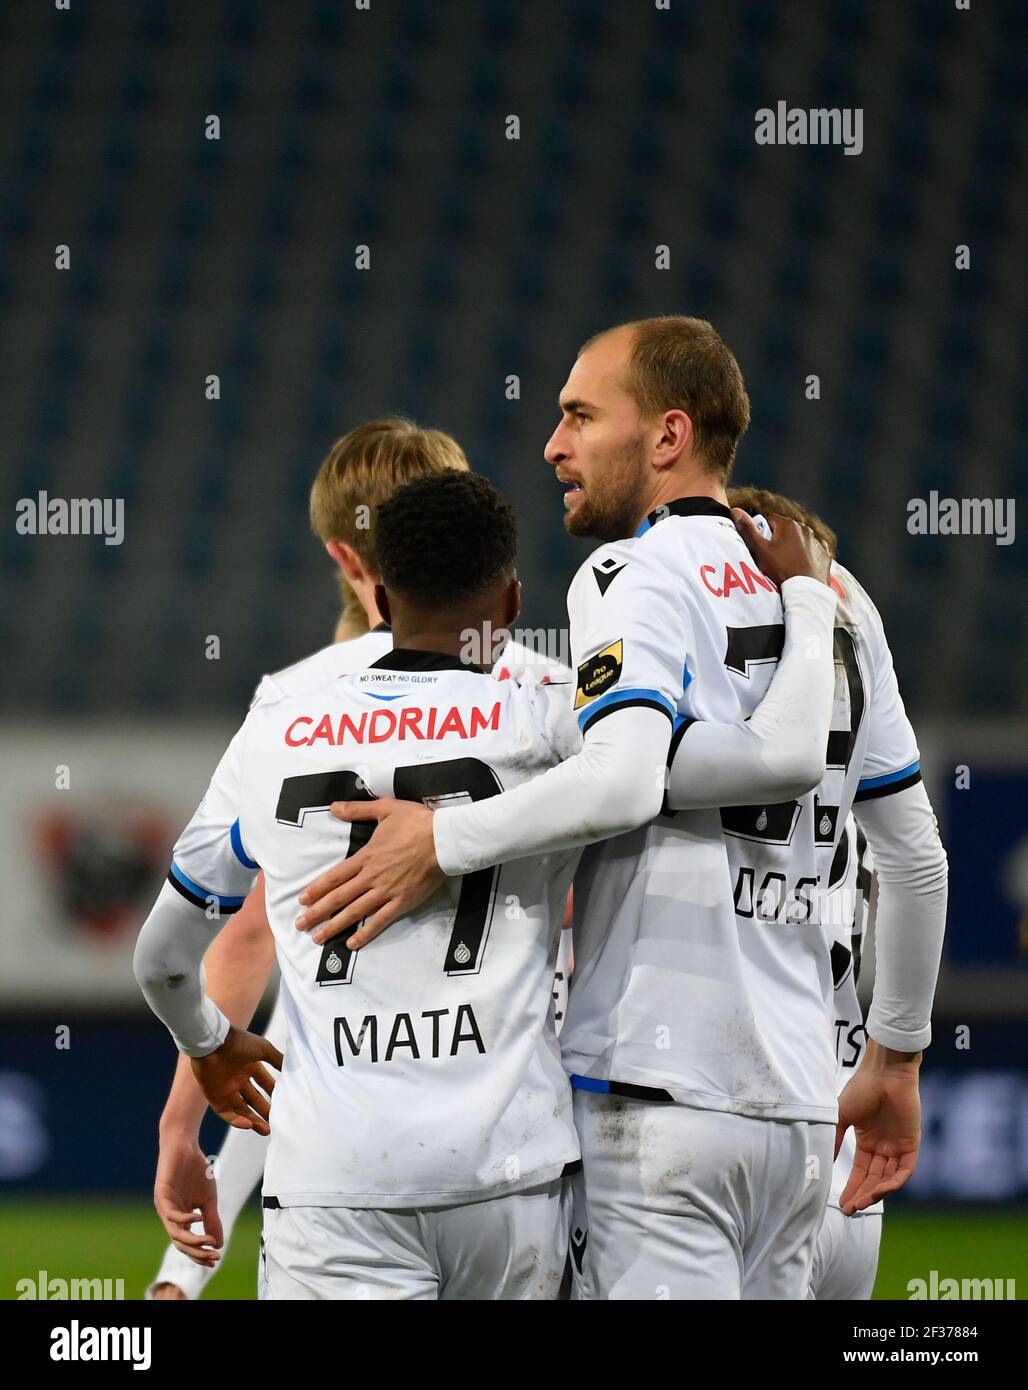 Club's Bas Dost celebrates after scoring during a soccer match between Club Brugge KV and KAA Gent, Monday 15 March 2021 in Brugge, a postponed match Stock Photo